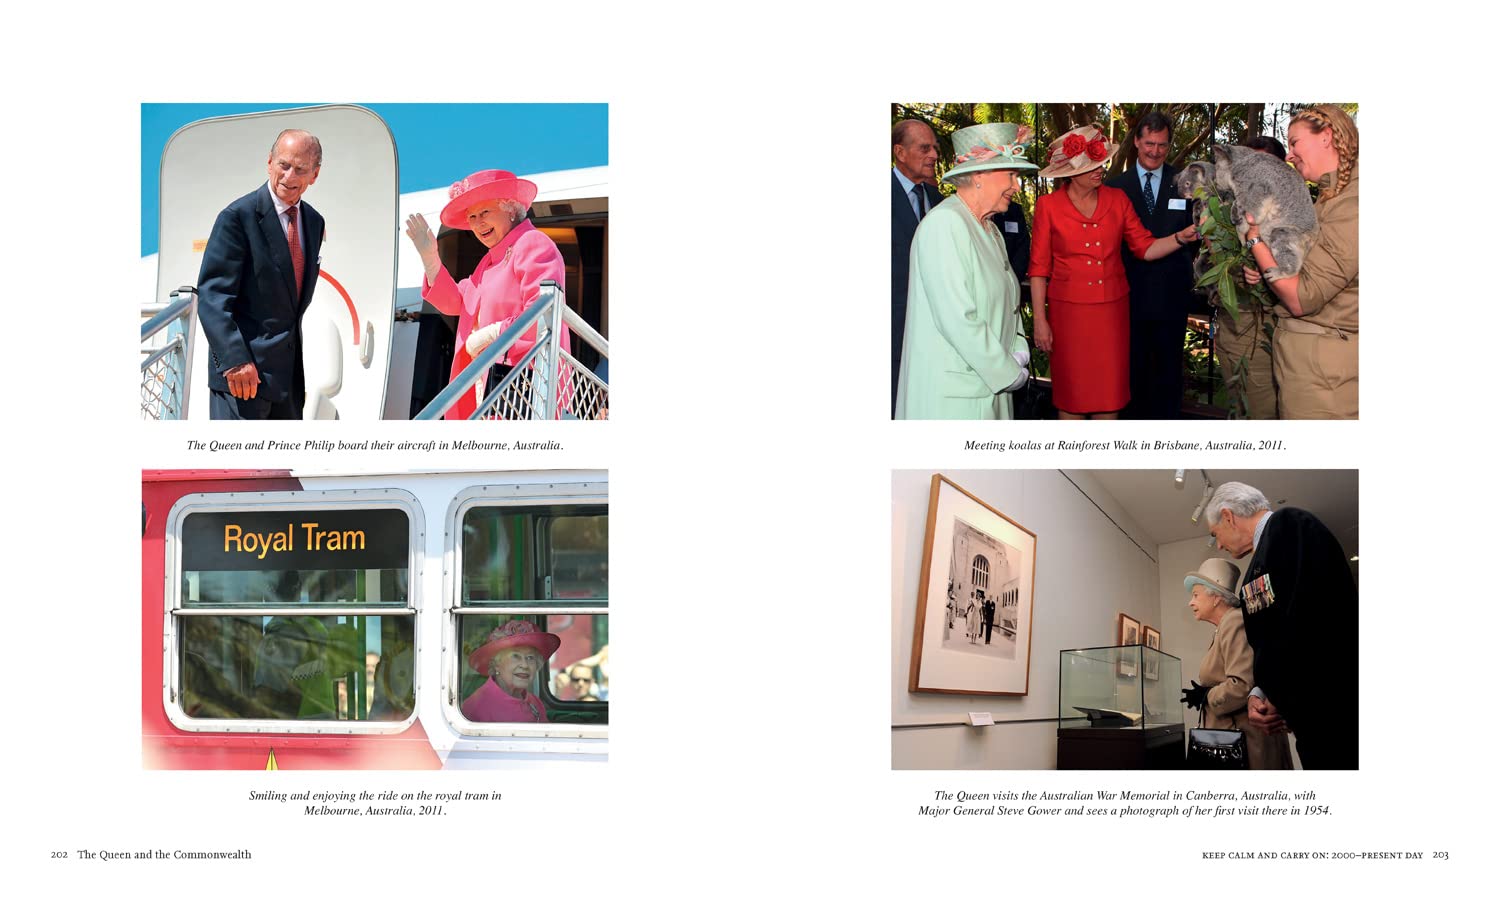 The Times: The Queen and the Commonwealth: Celebrating seven decades of state visits - The English Bookshop Kuwait